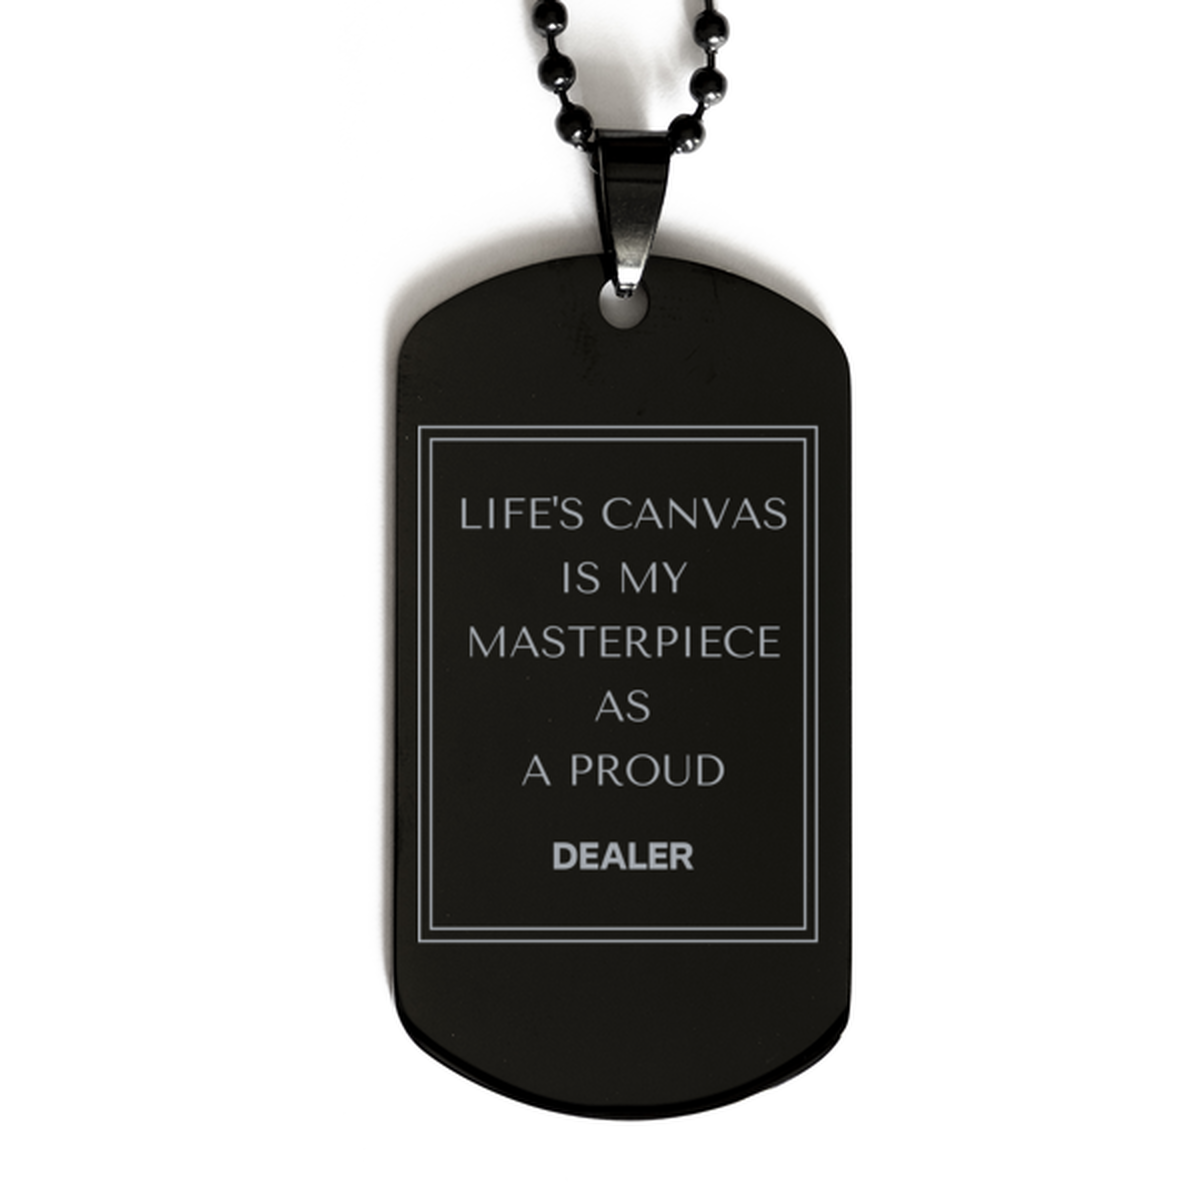 Proud Dealer Gifts, Life's canvas is my masterpiece, Epic Birthday Christmas Unique Black Dog Tag For Dealer, Coworkers, Men, Women, Friends